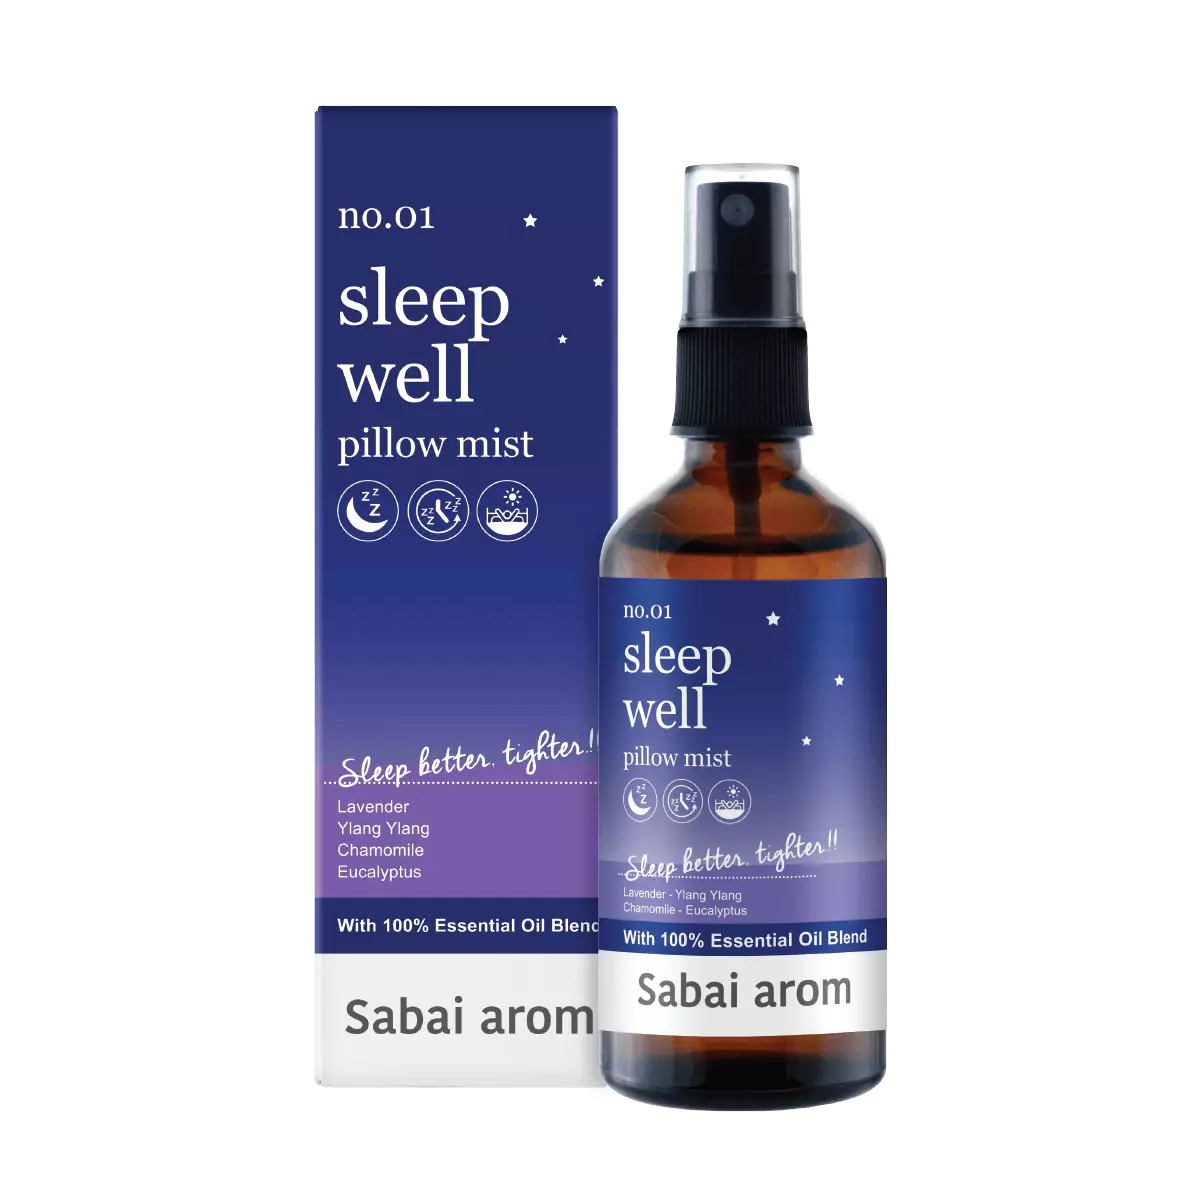 sleep pillow mist 100ml Sleep Well Pillow Mist is a natural solution for minds that struggle to find their break at bedtime to add aromatherapy to the favorite pillows for better quality sleep. It is created with deep relaxing aromas of Lavender, well known for its deep relaxing benefits, married to a hint of sensual Ylang Ylang, soothing Chamomile, cooling Eucalyptus and super euphoric characters of Bergamot and Sweet Orange. It’s time to sleep happily like a little child. <strong>Scent</strong> : The night thoroughly filled with deep floral comfort of Lavender, Ylang Ylang and Chamomile, and cooling breeze of Eucalyptus blows gently to your window panes, imparting the sensuality that calms mind struggling to find its break at bedtime.